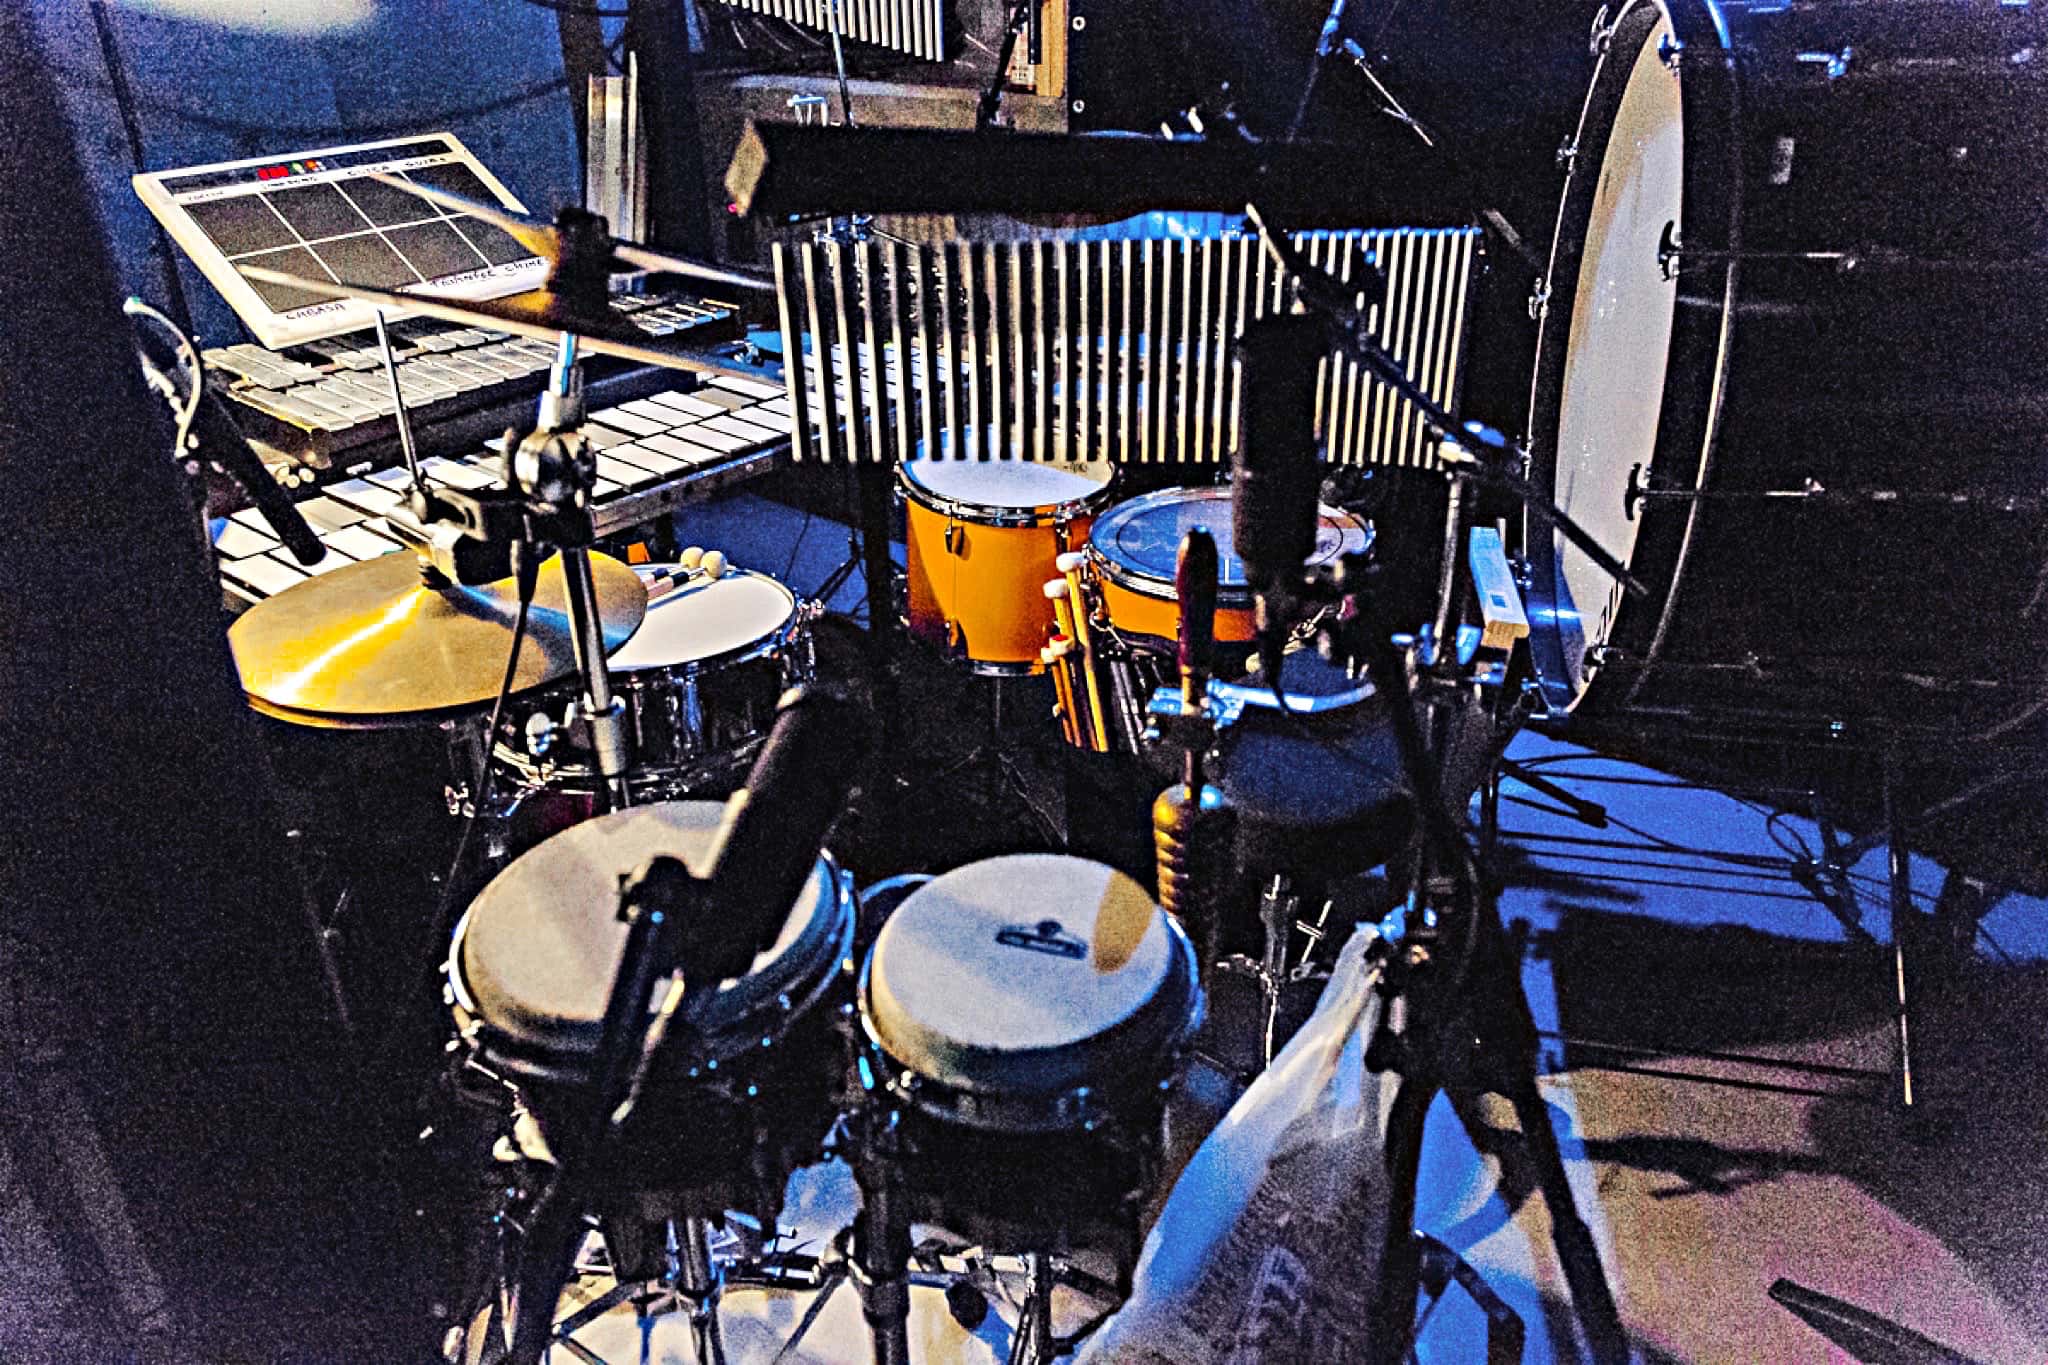 Nick Apivor's combined set up for Mary Poppins at the Western Canada Theatre in Kamloops, British Columbia, Canada.